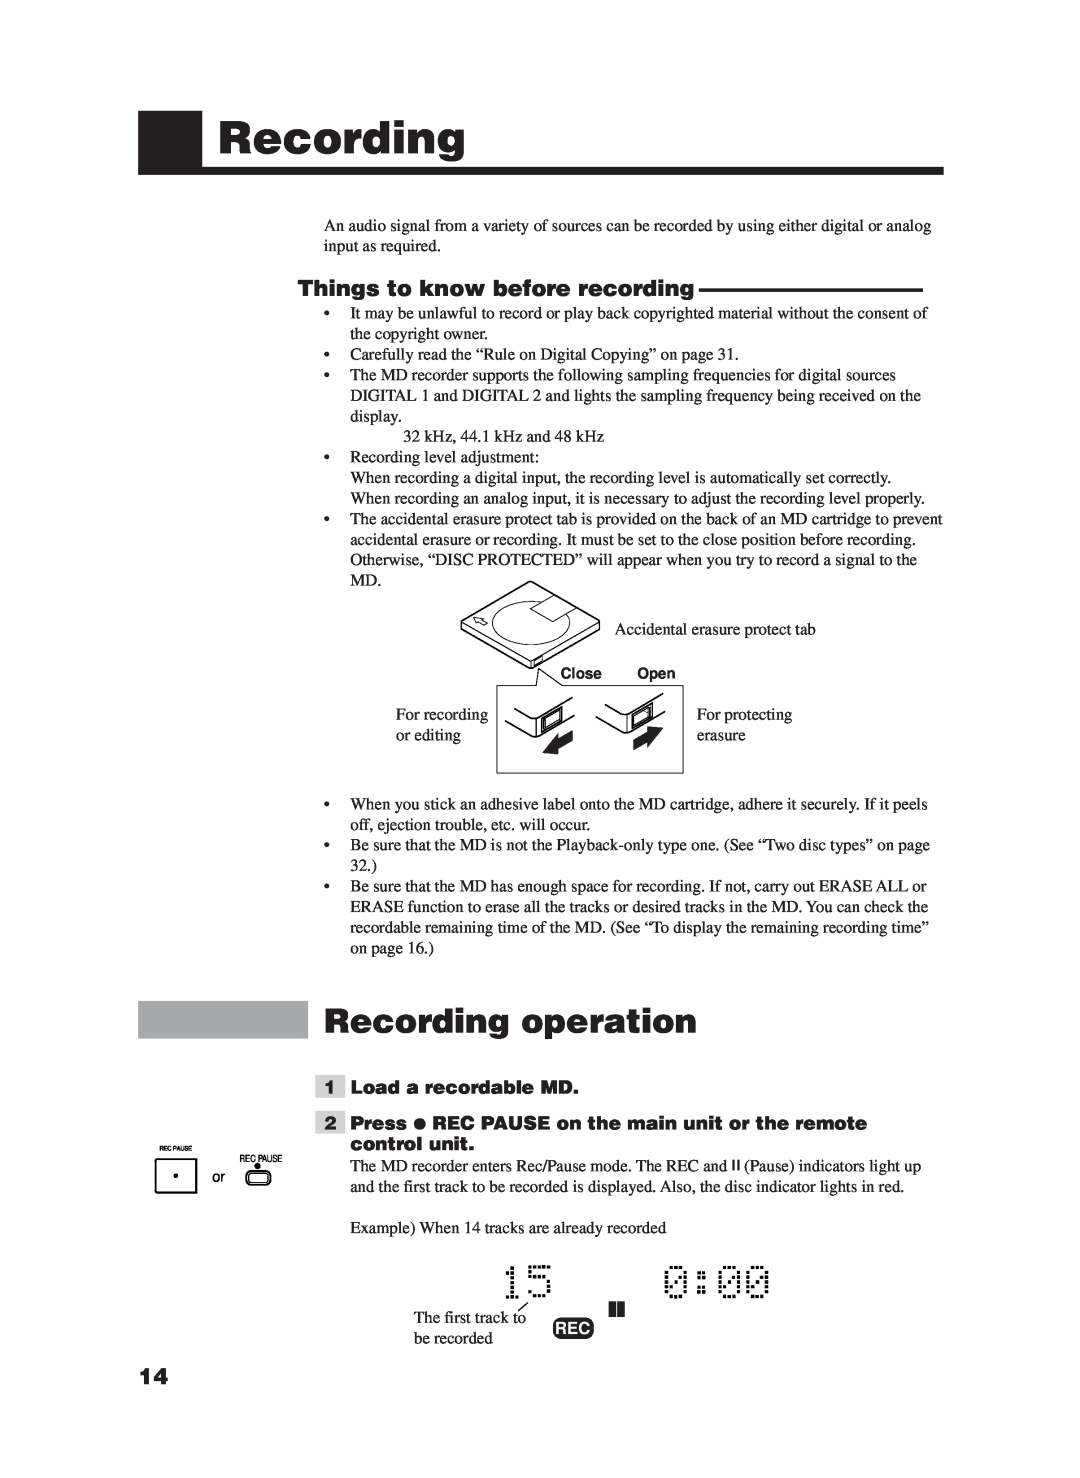 JVC XM-228BK manual Recording operation, Things to know before recording, 1Load a recordable MD 